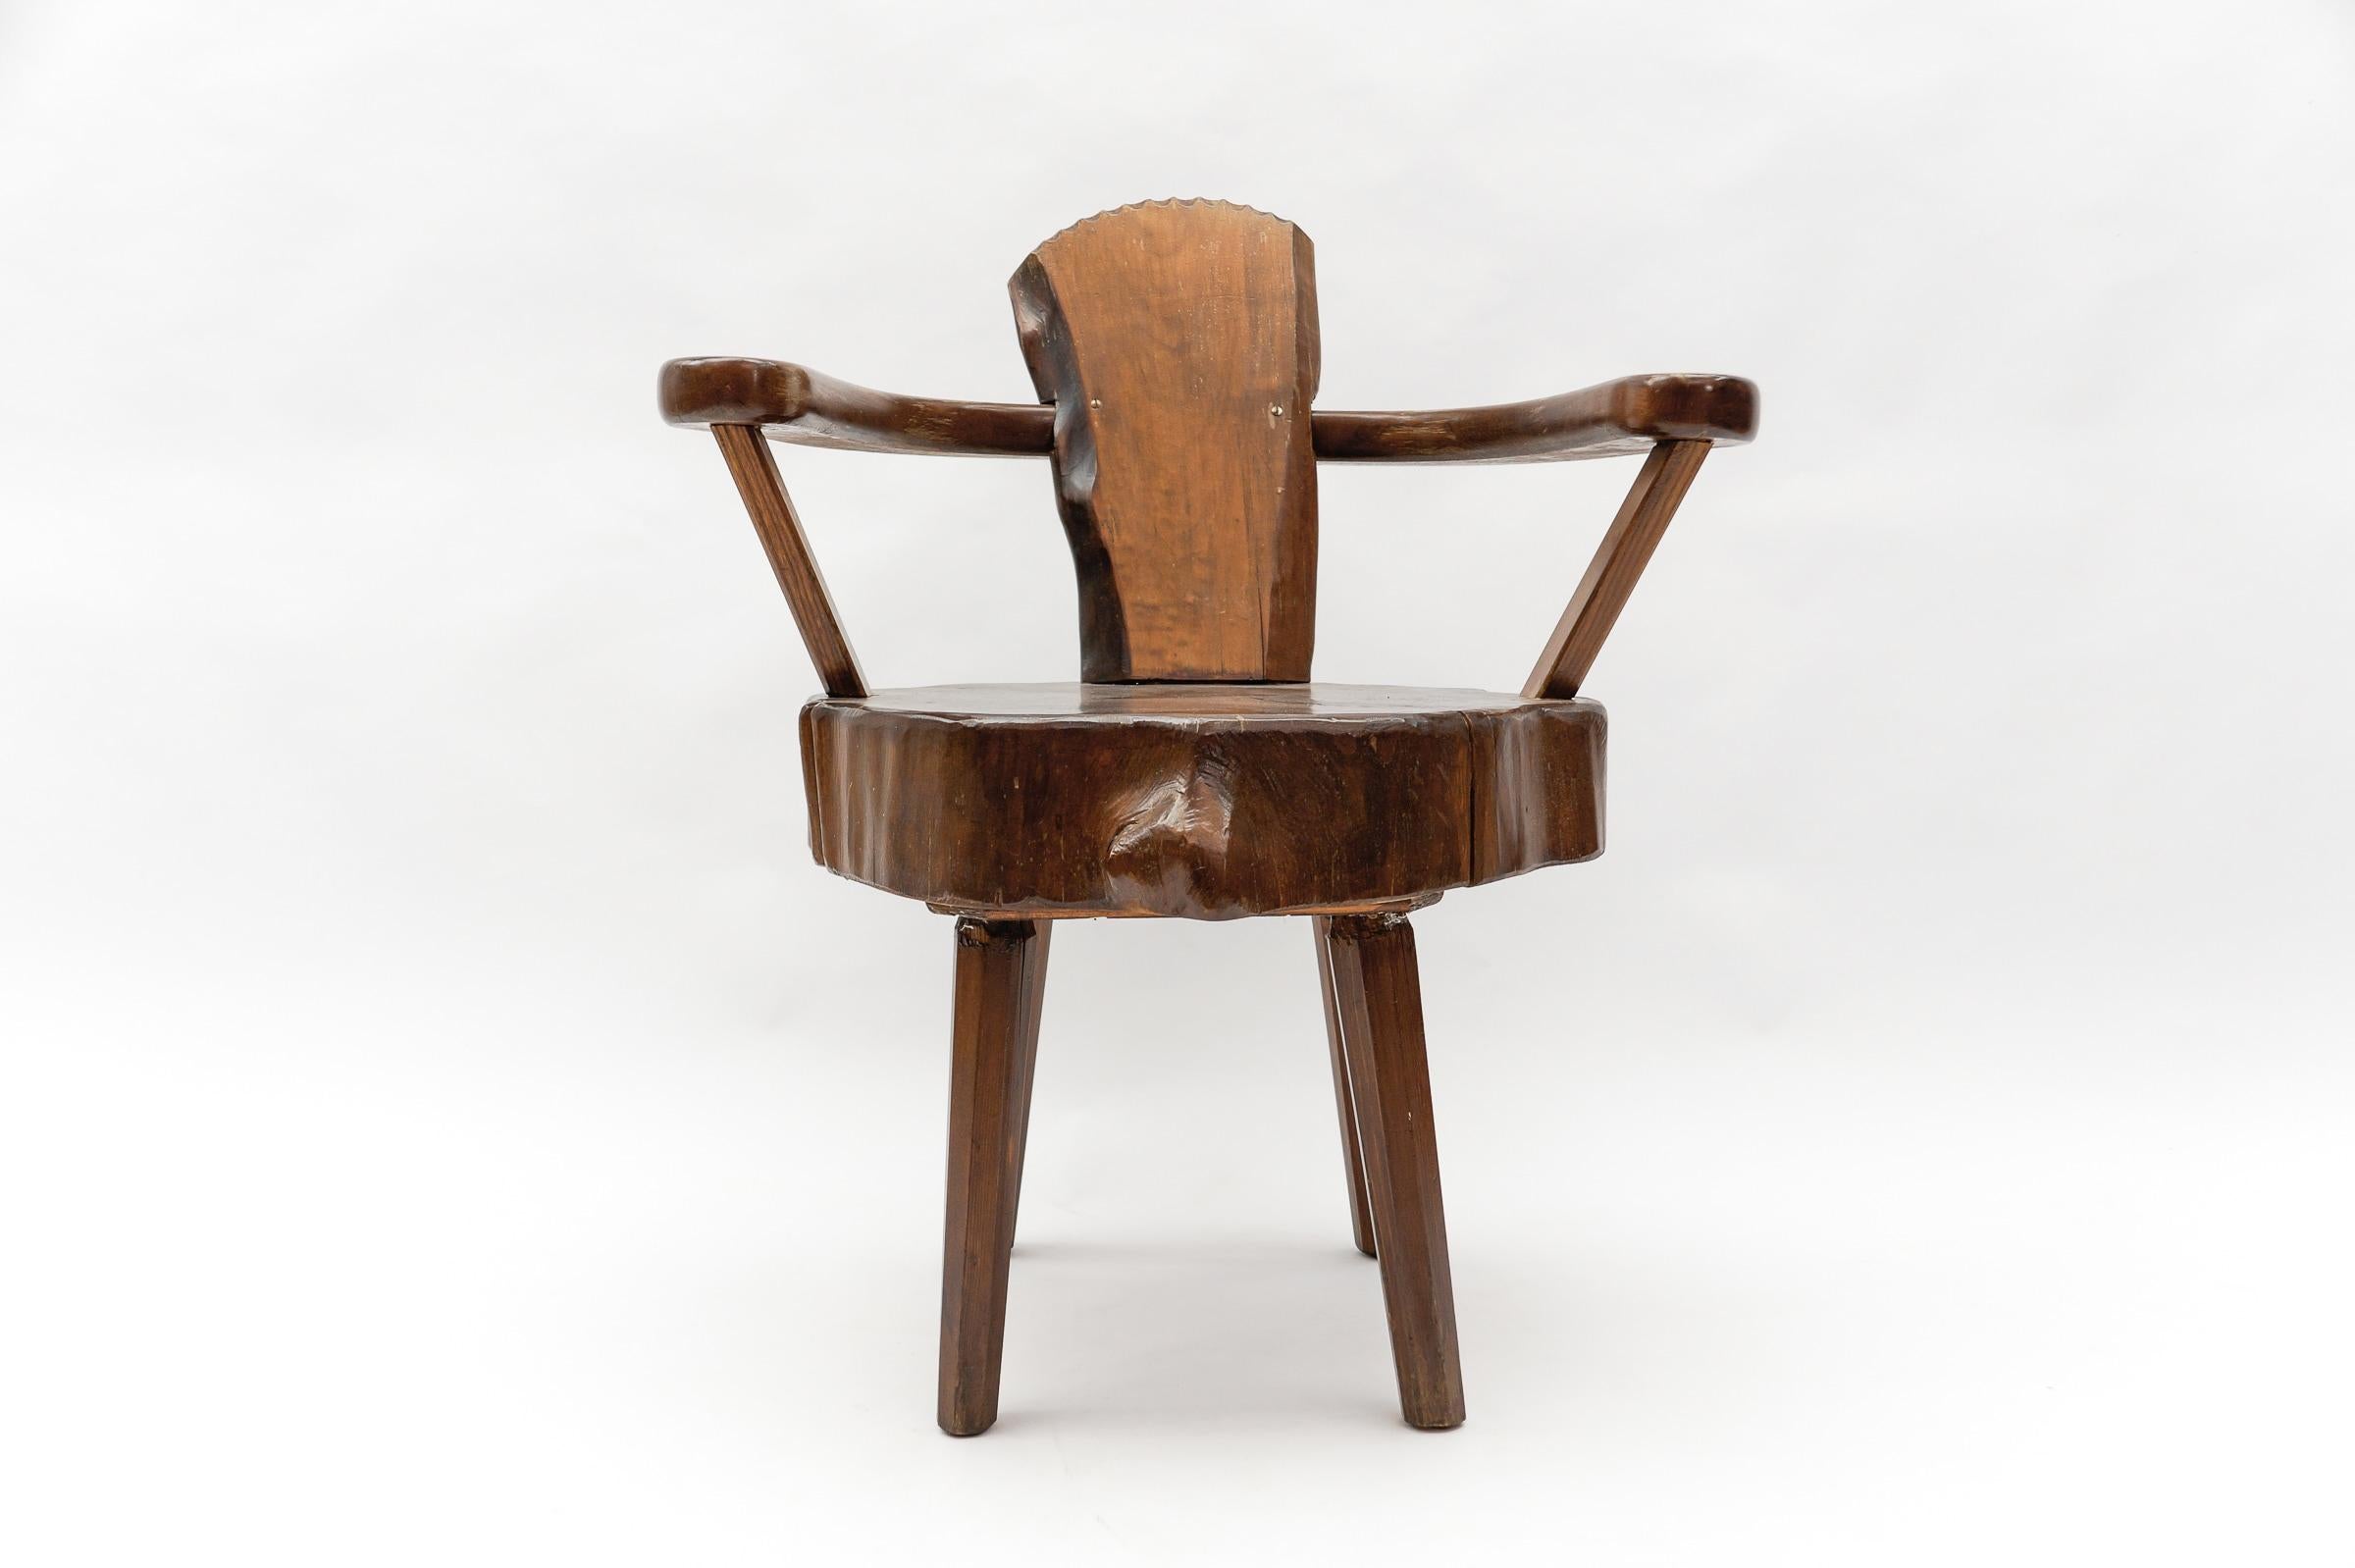 A total of four are available and are offered for sale here on the platform. 

Dark stained. Cool optic. Handmade imposing wooden armchair. Each armchair is unique.

This armchair here has a seat height of 46cm. The tree trunk thickness is 11cm.

 
